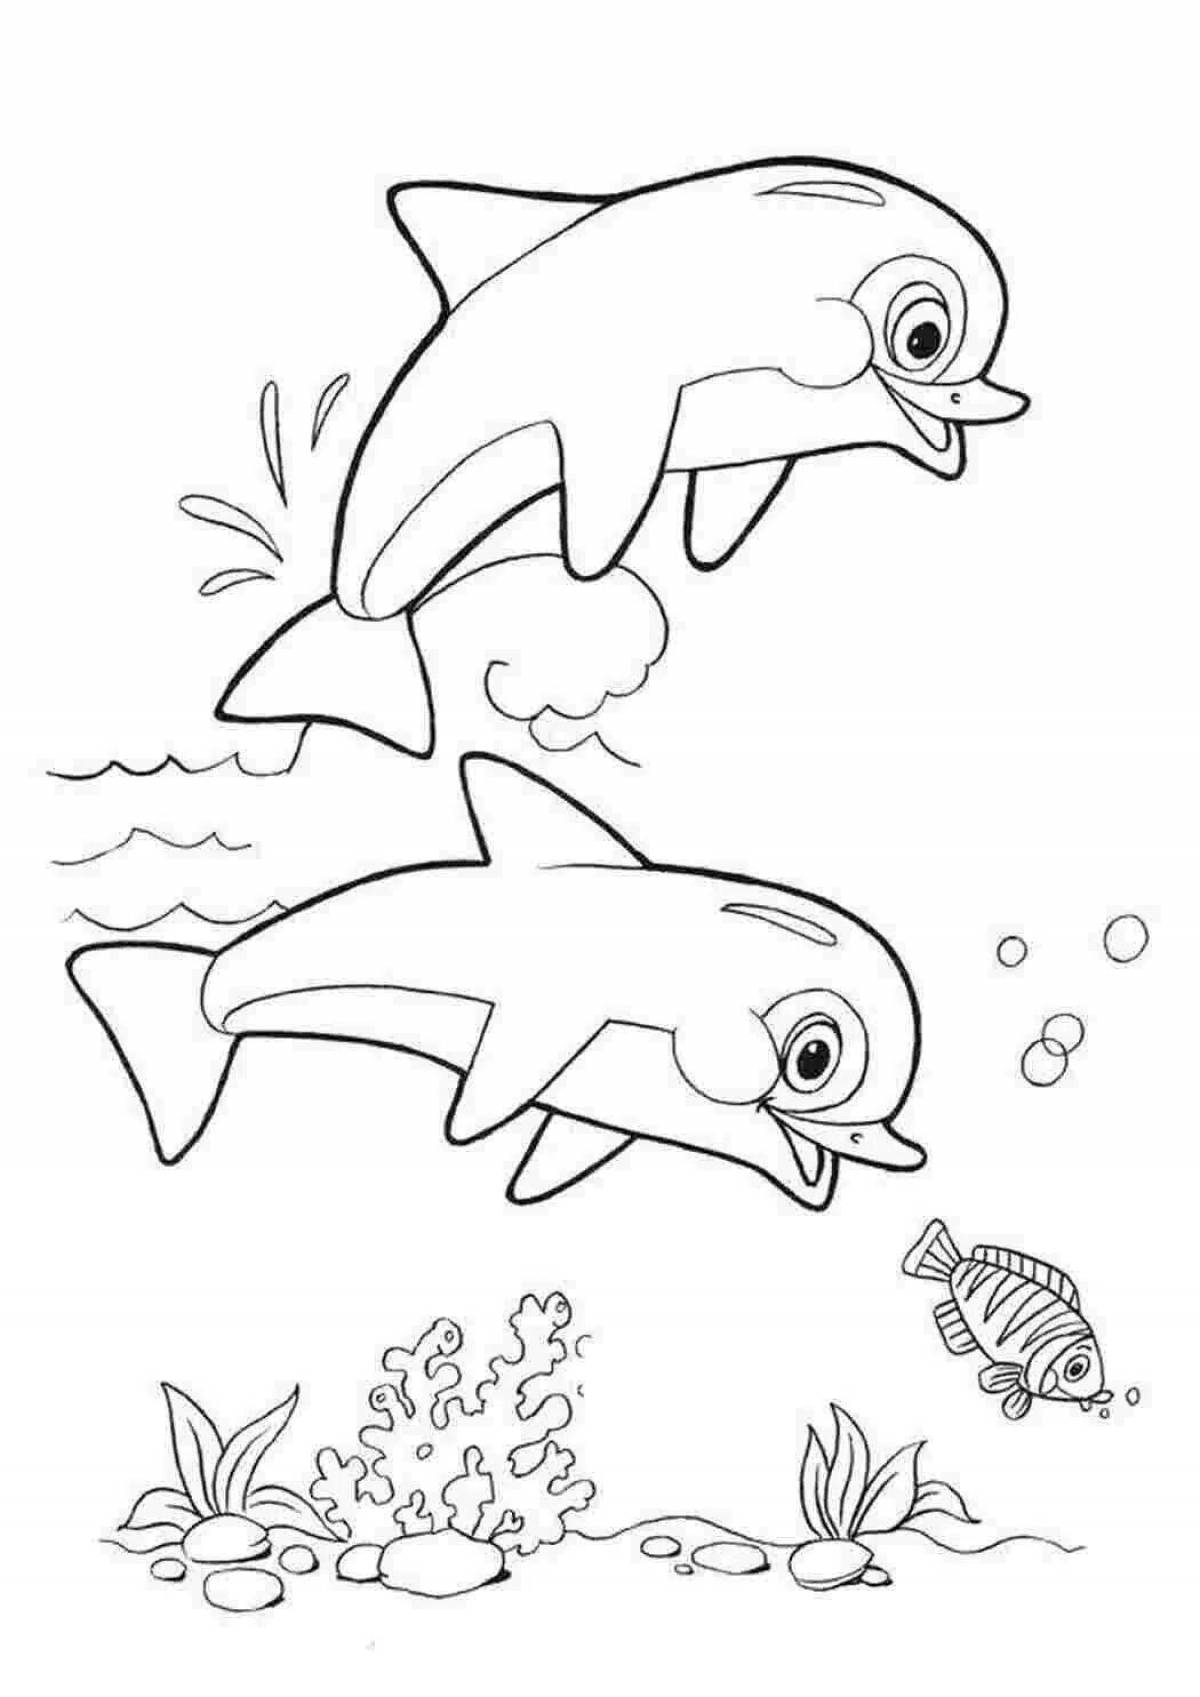 Majestic coloring pages inhabitants of the seas and oceans for children